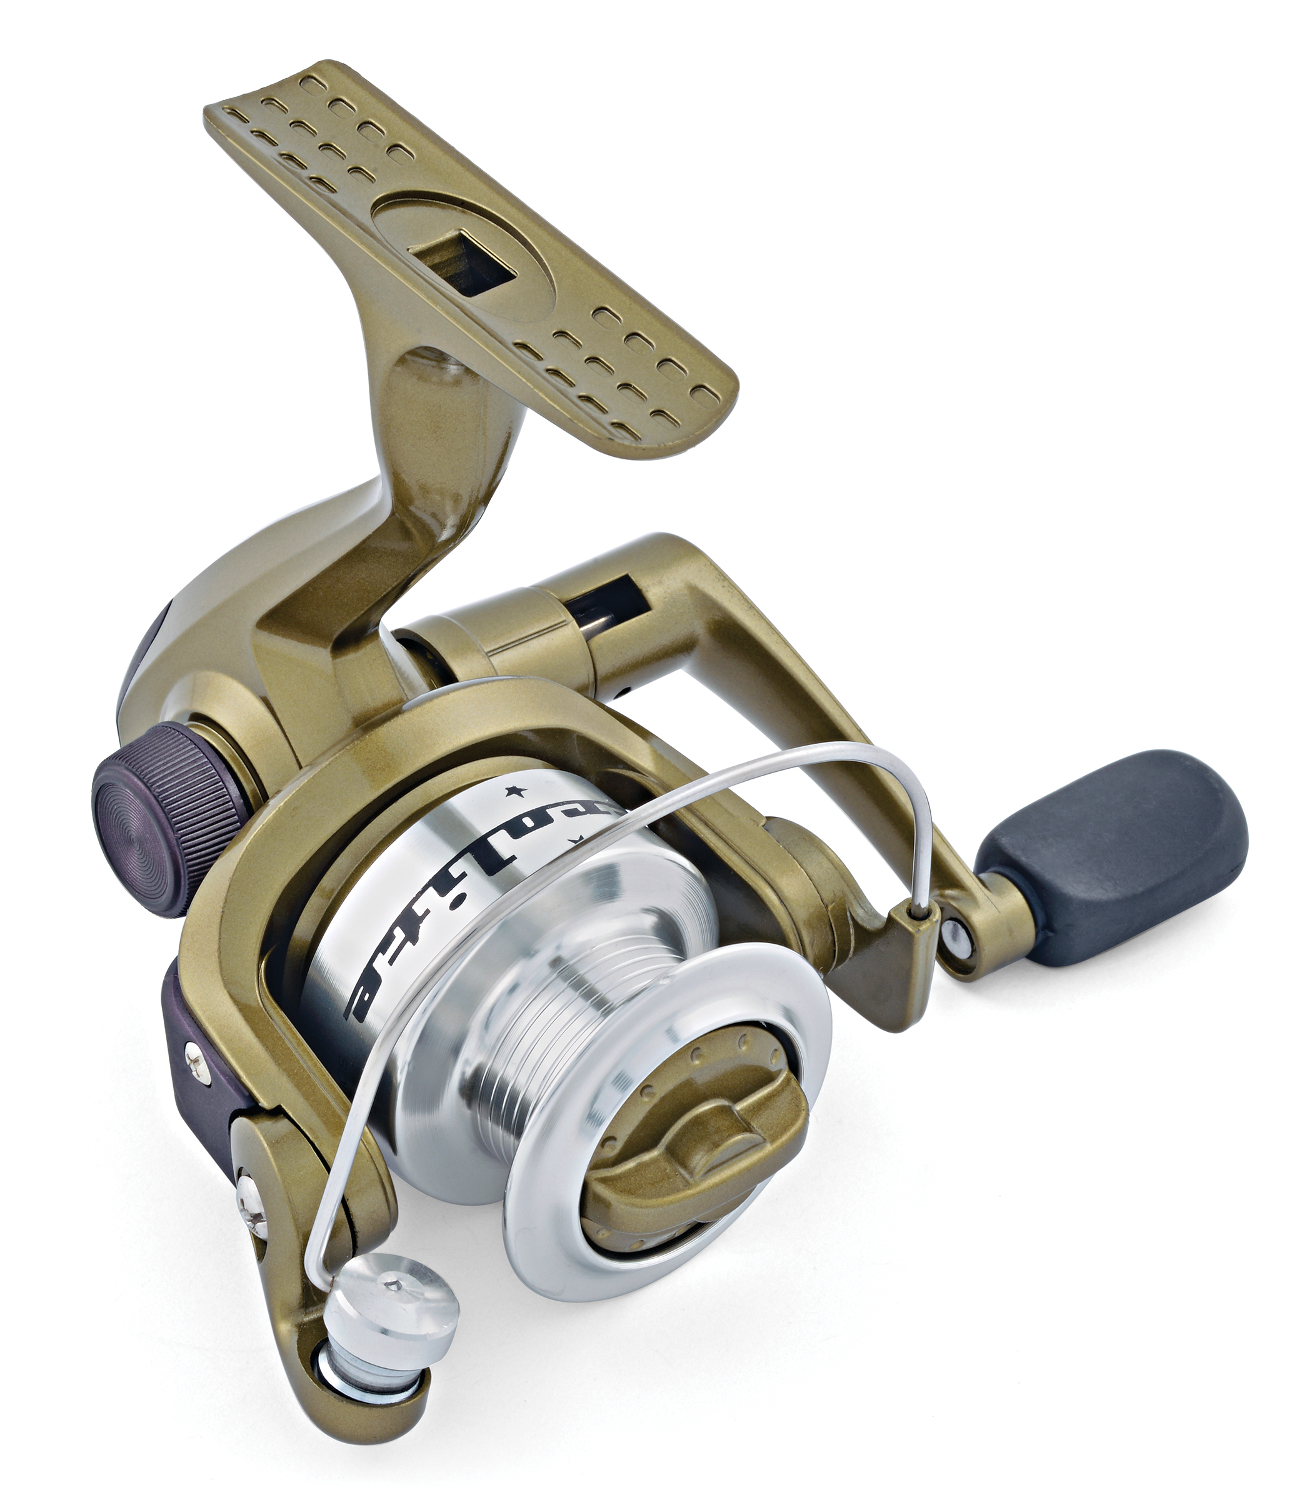 South Bend Worm Gear Spinning Combo — CampSaver